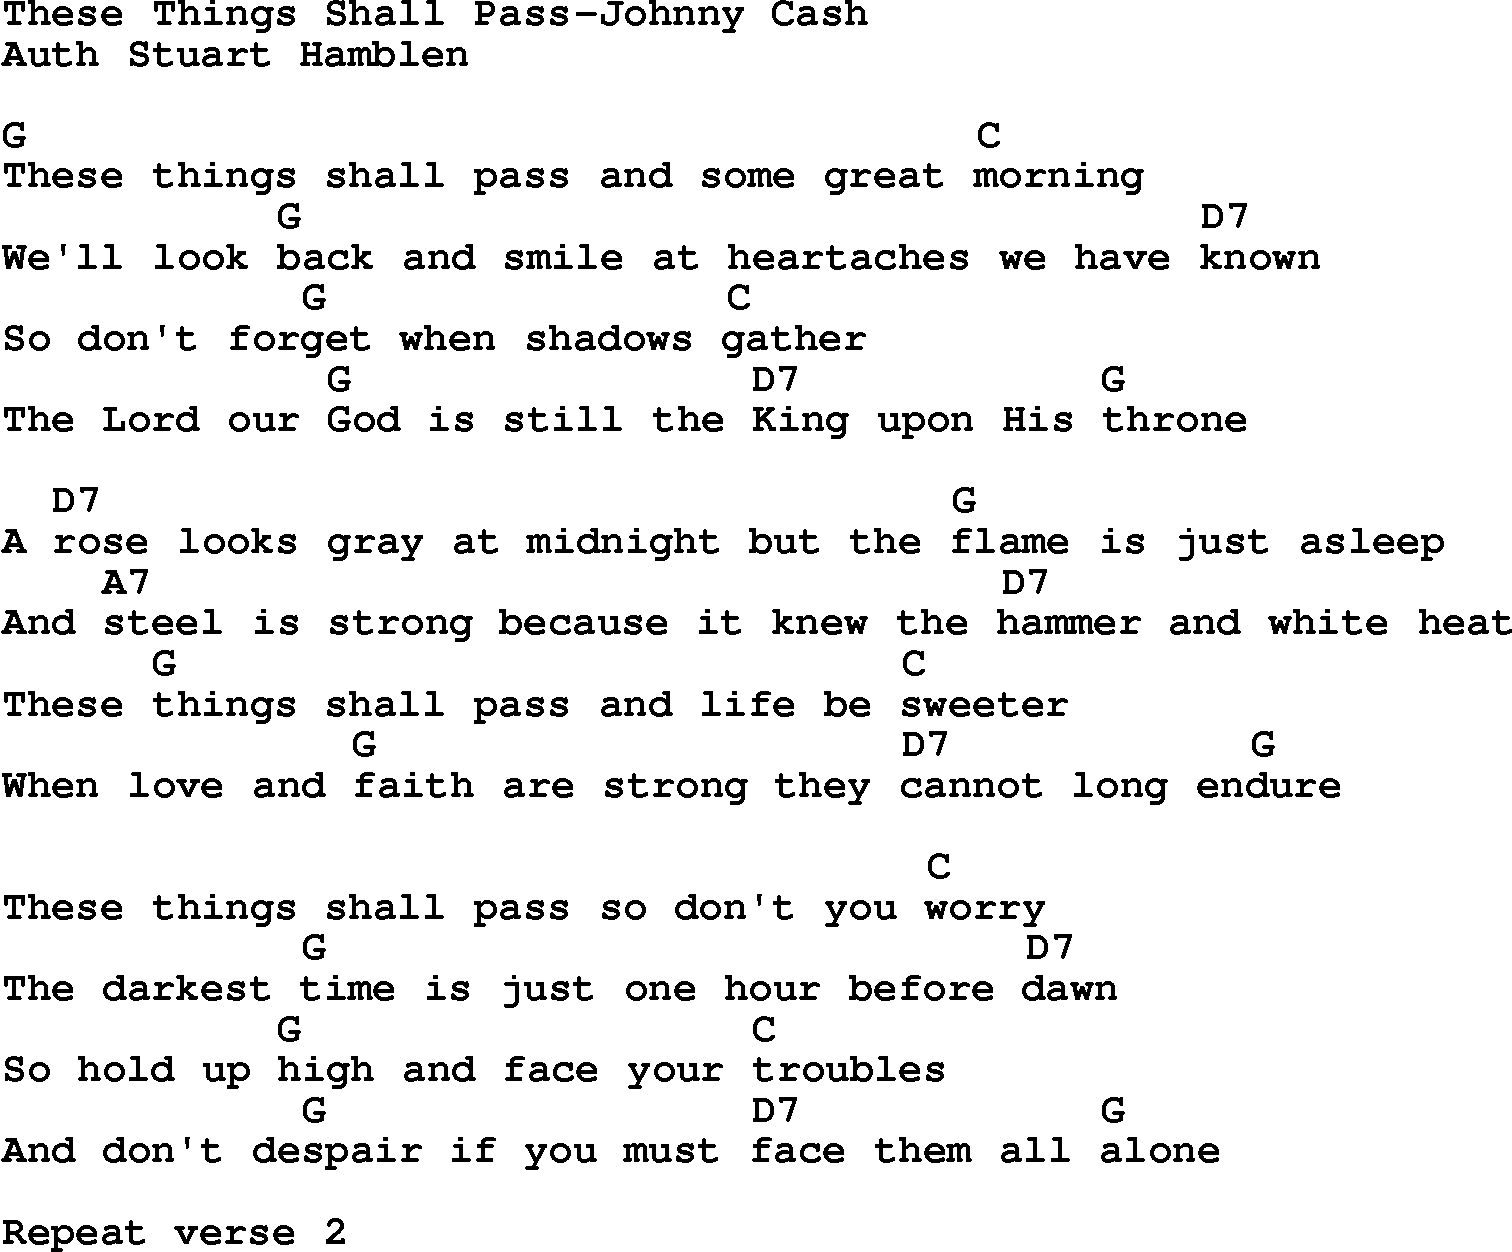 Country, Southern and Bluegrass Gospel Song These Things Shall Pass-Johnny Cash lyrics and chords